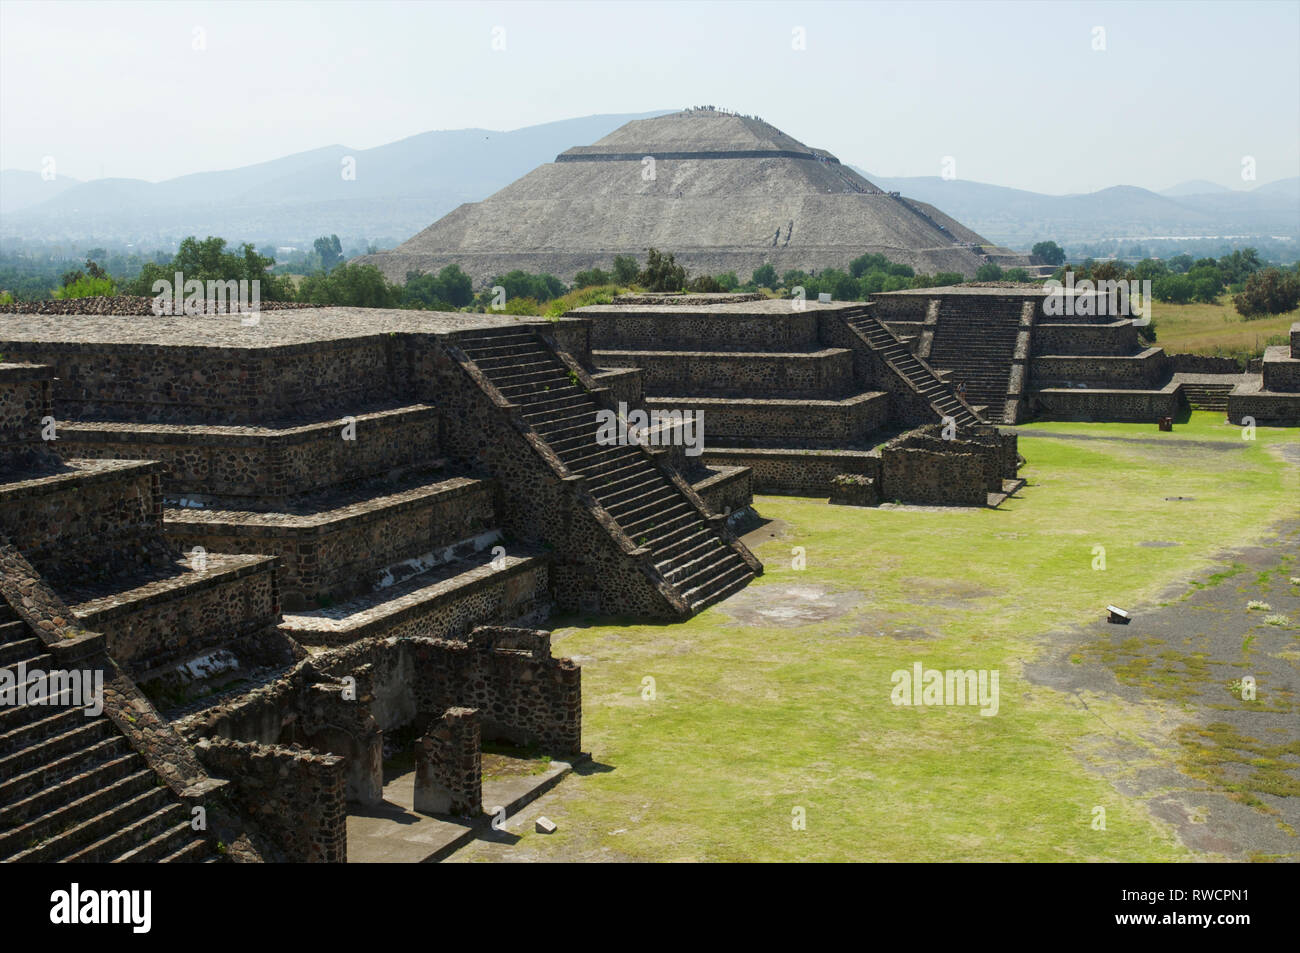 Pyramid of The Sun and the Avenue of the Dead in the distance seen from Pyramid of The Moon at Teotihuacan in the Valley of Mexico in Mexico Stock Photo